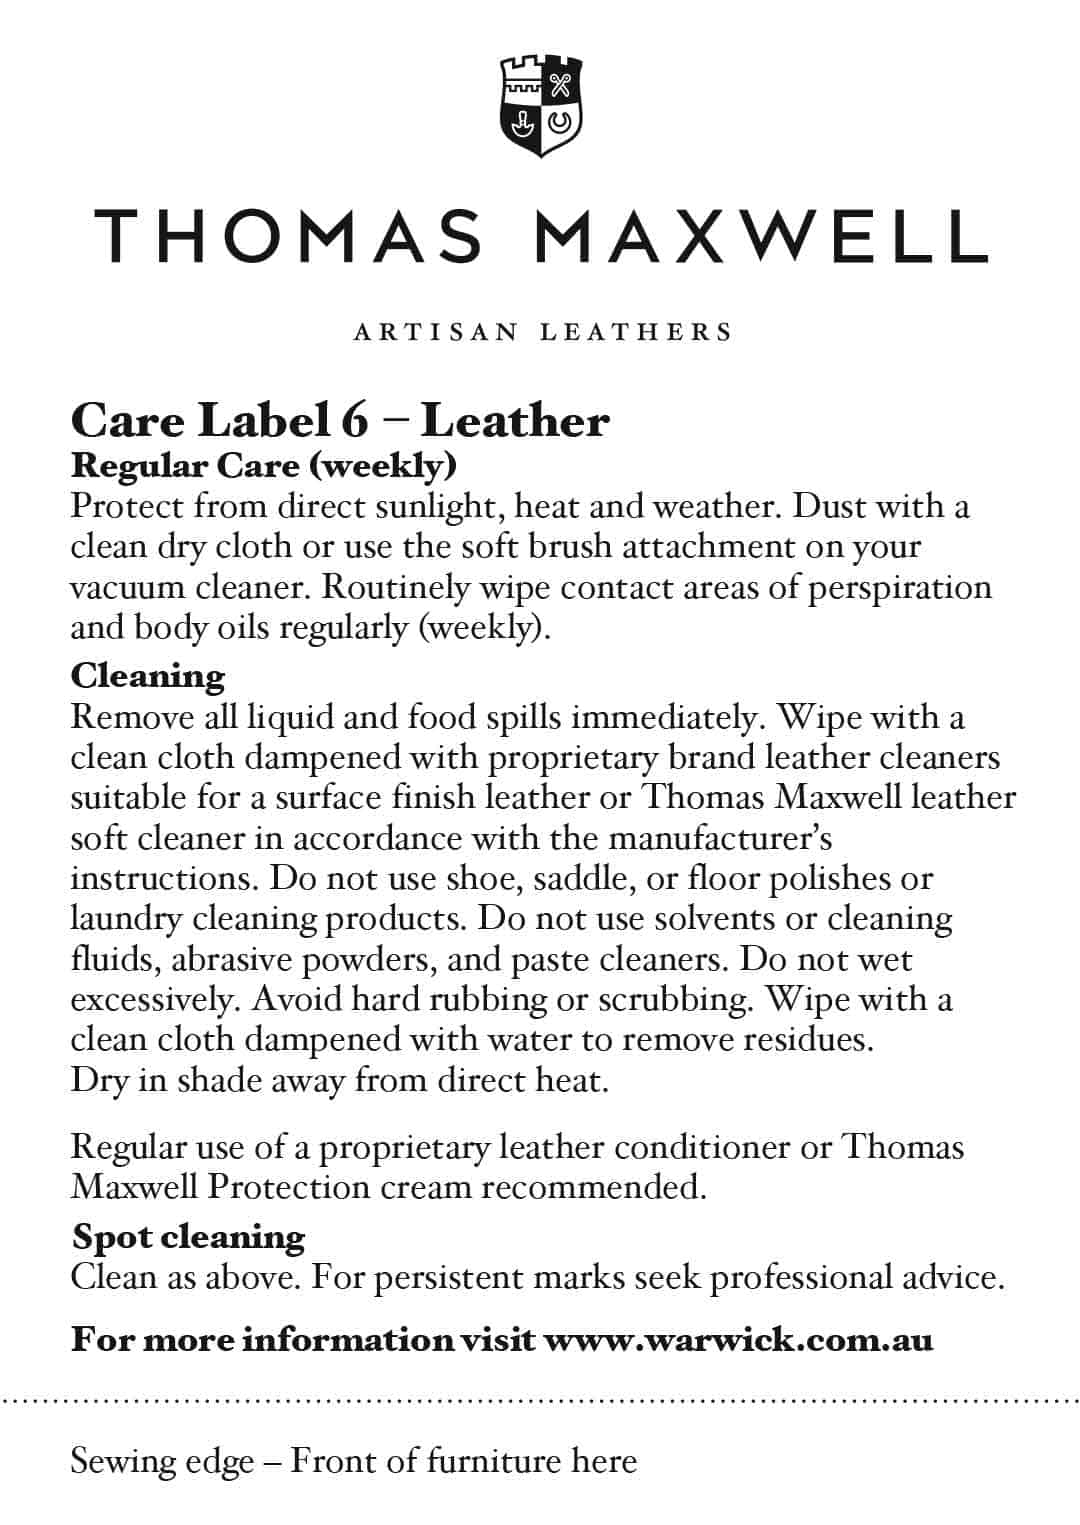 Thomas Maxwell, Sydney, Leather Lounge care and cleaning document